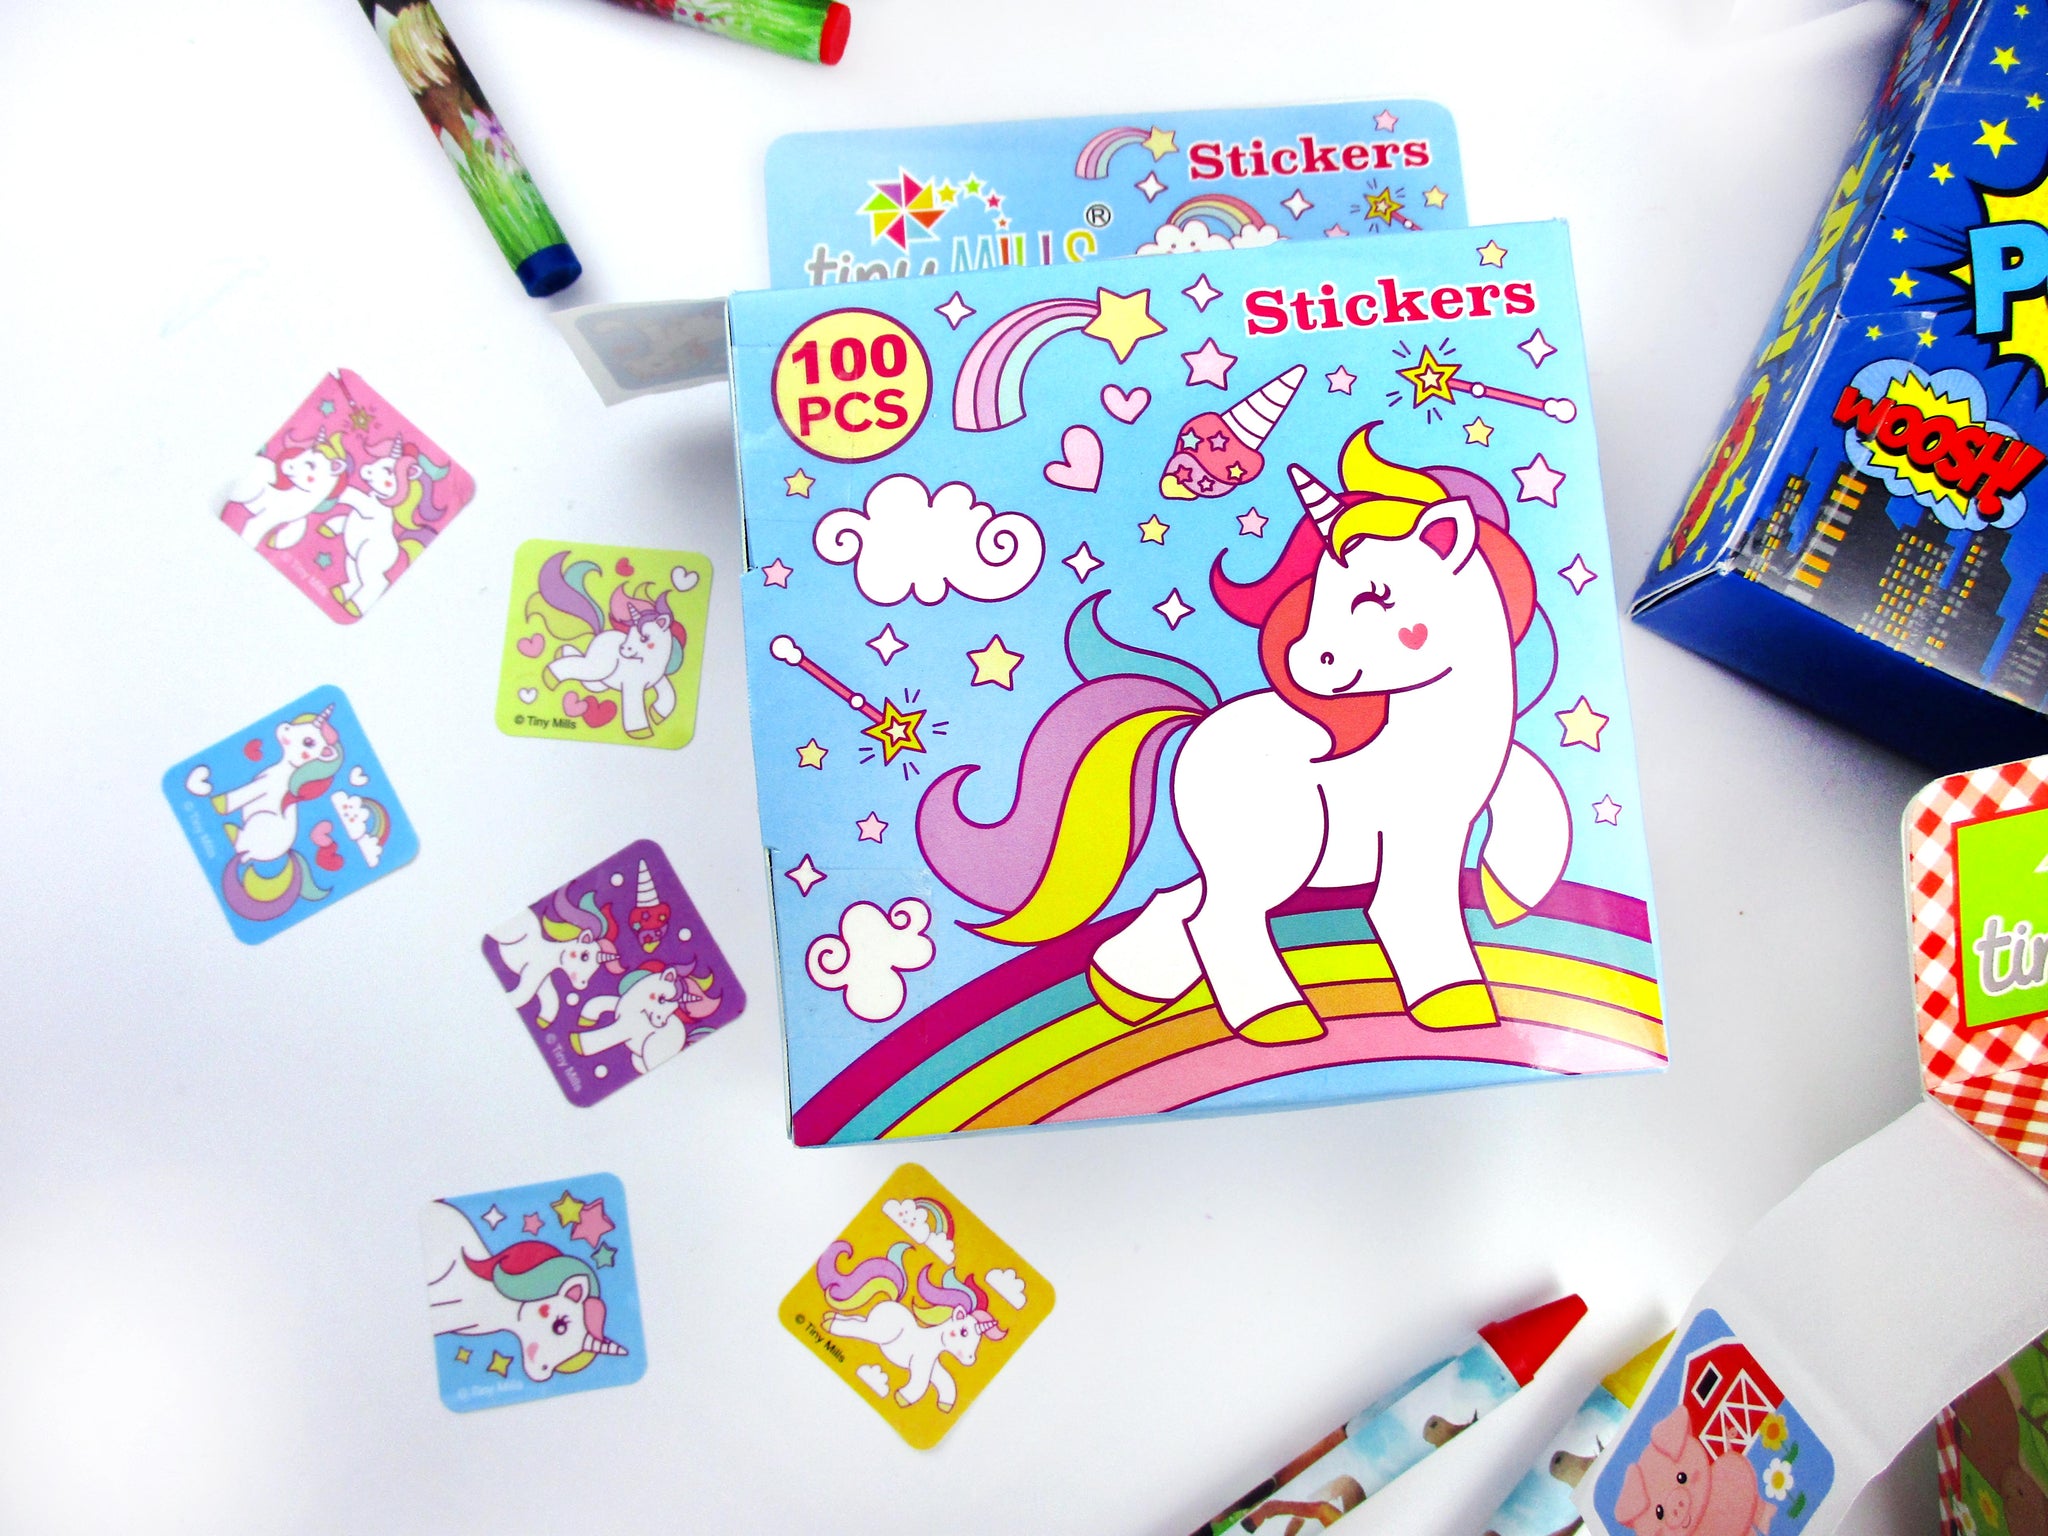 Unicorn Stickers 100 Stickers/Dispenser, Pack of 1, 6 or 12 Dispensers ...